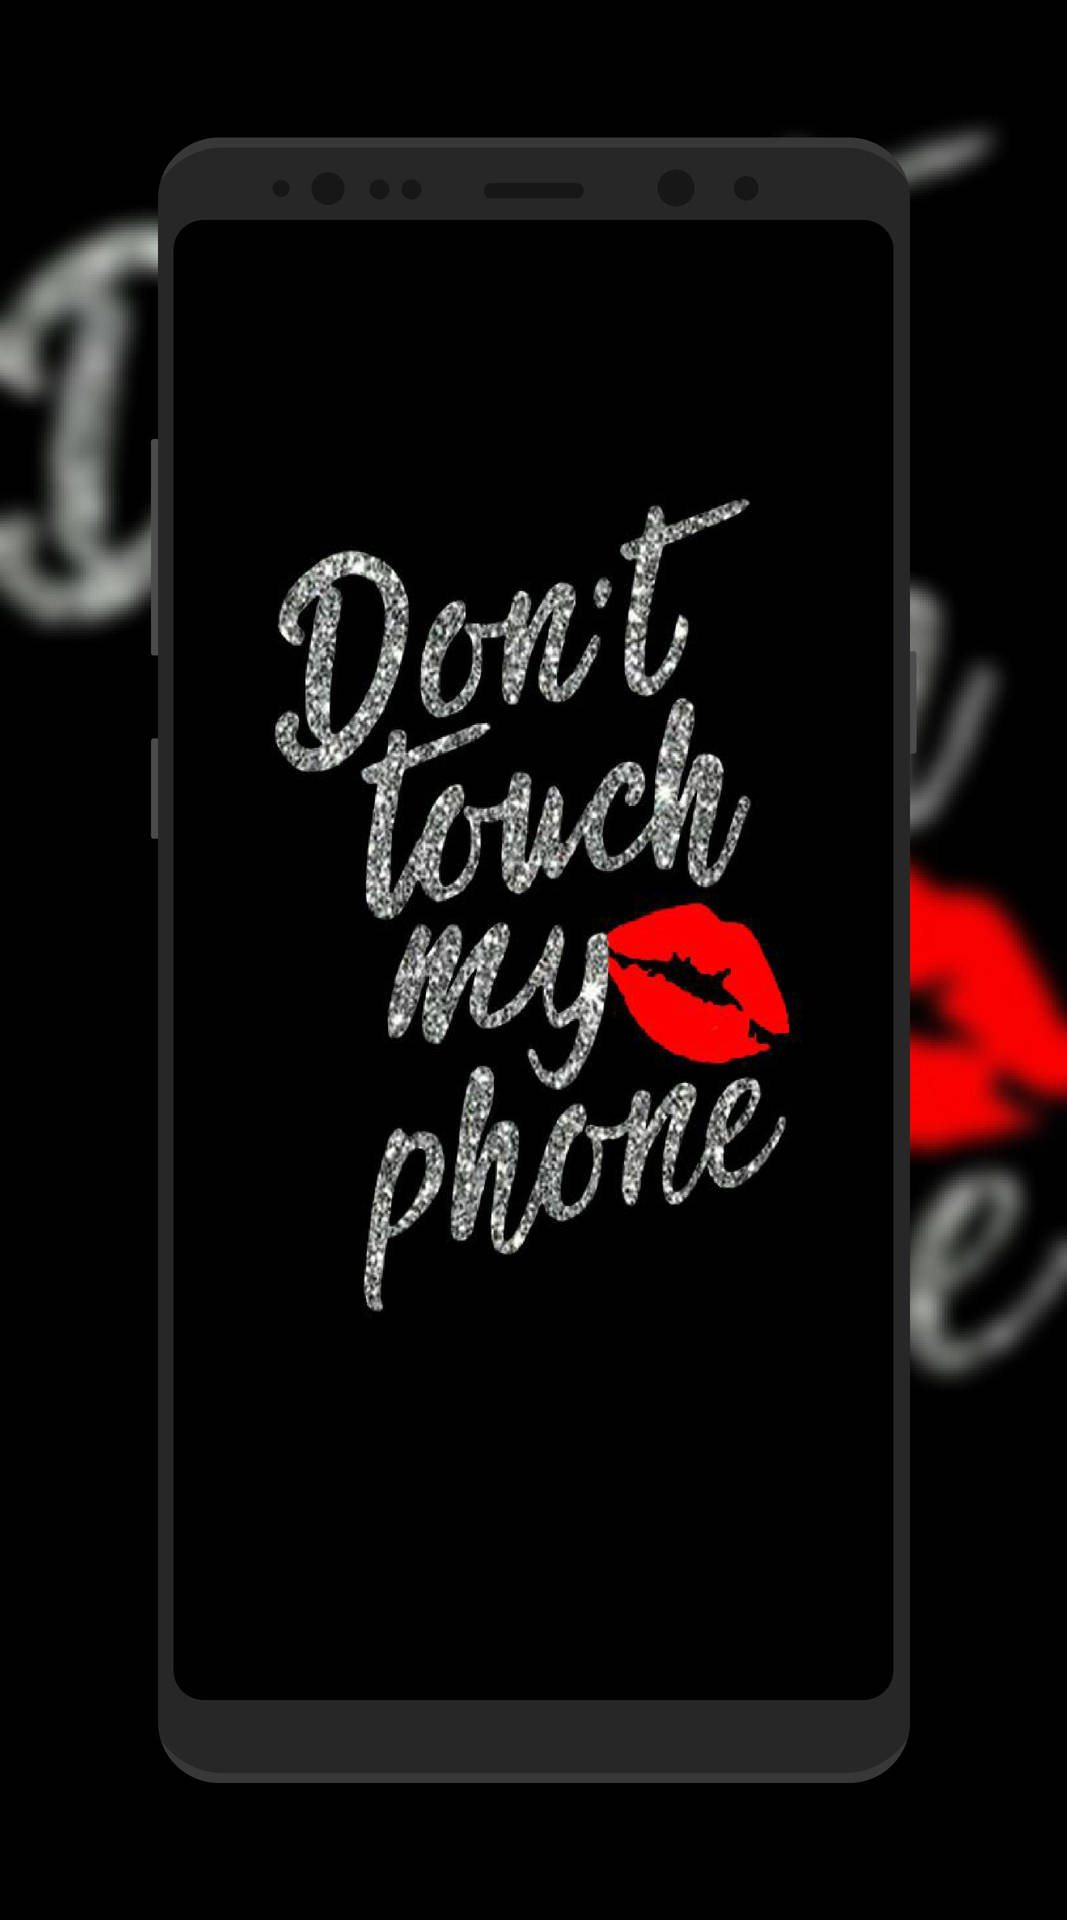 Dont Touch My Phone 2134X3840 wallpaper